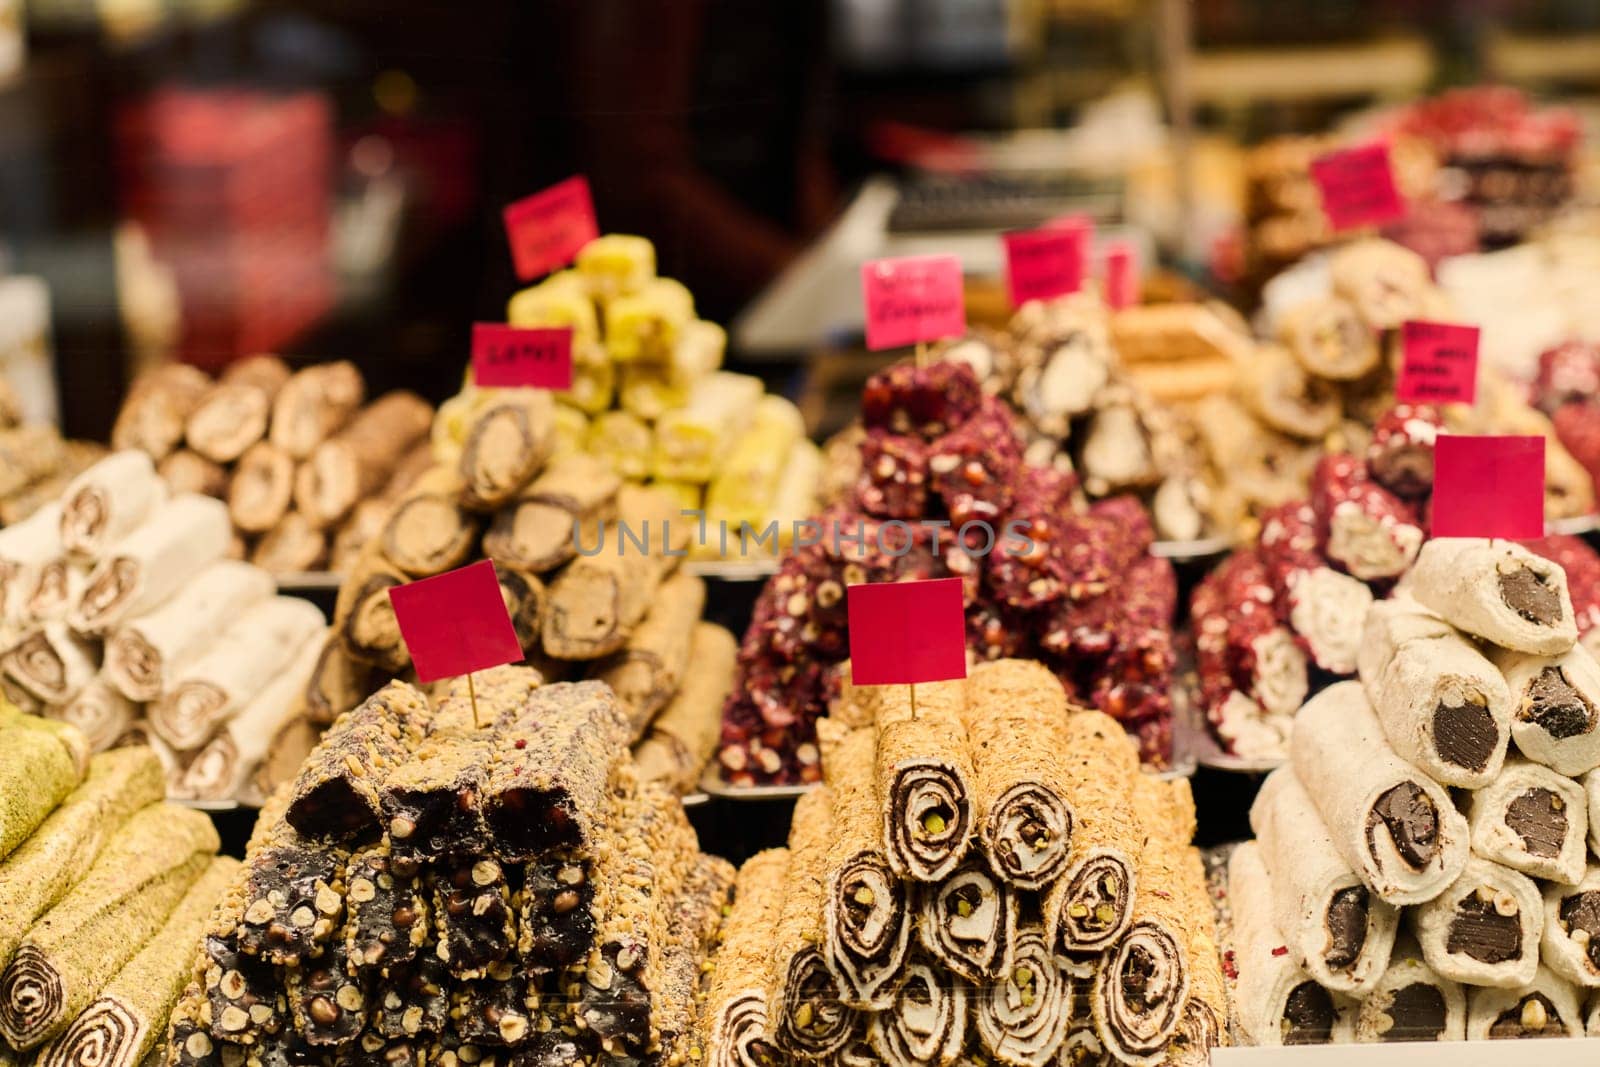 Capturing the Essence of Turkish Delights: Indulging in the Irresistible Sweet Treats of Istanbul's Streets. by dotshock